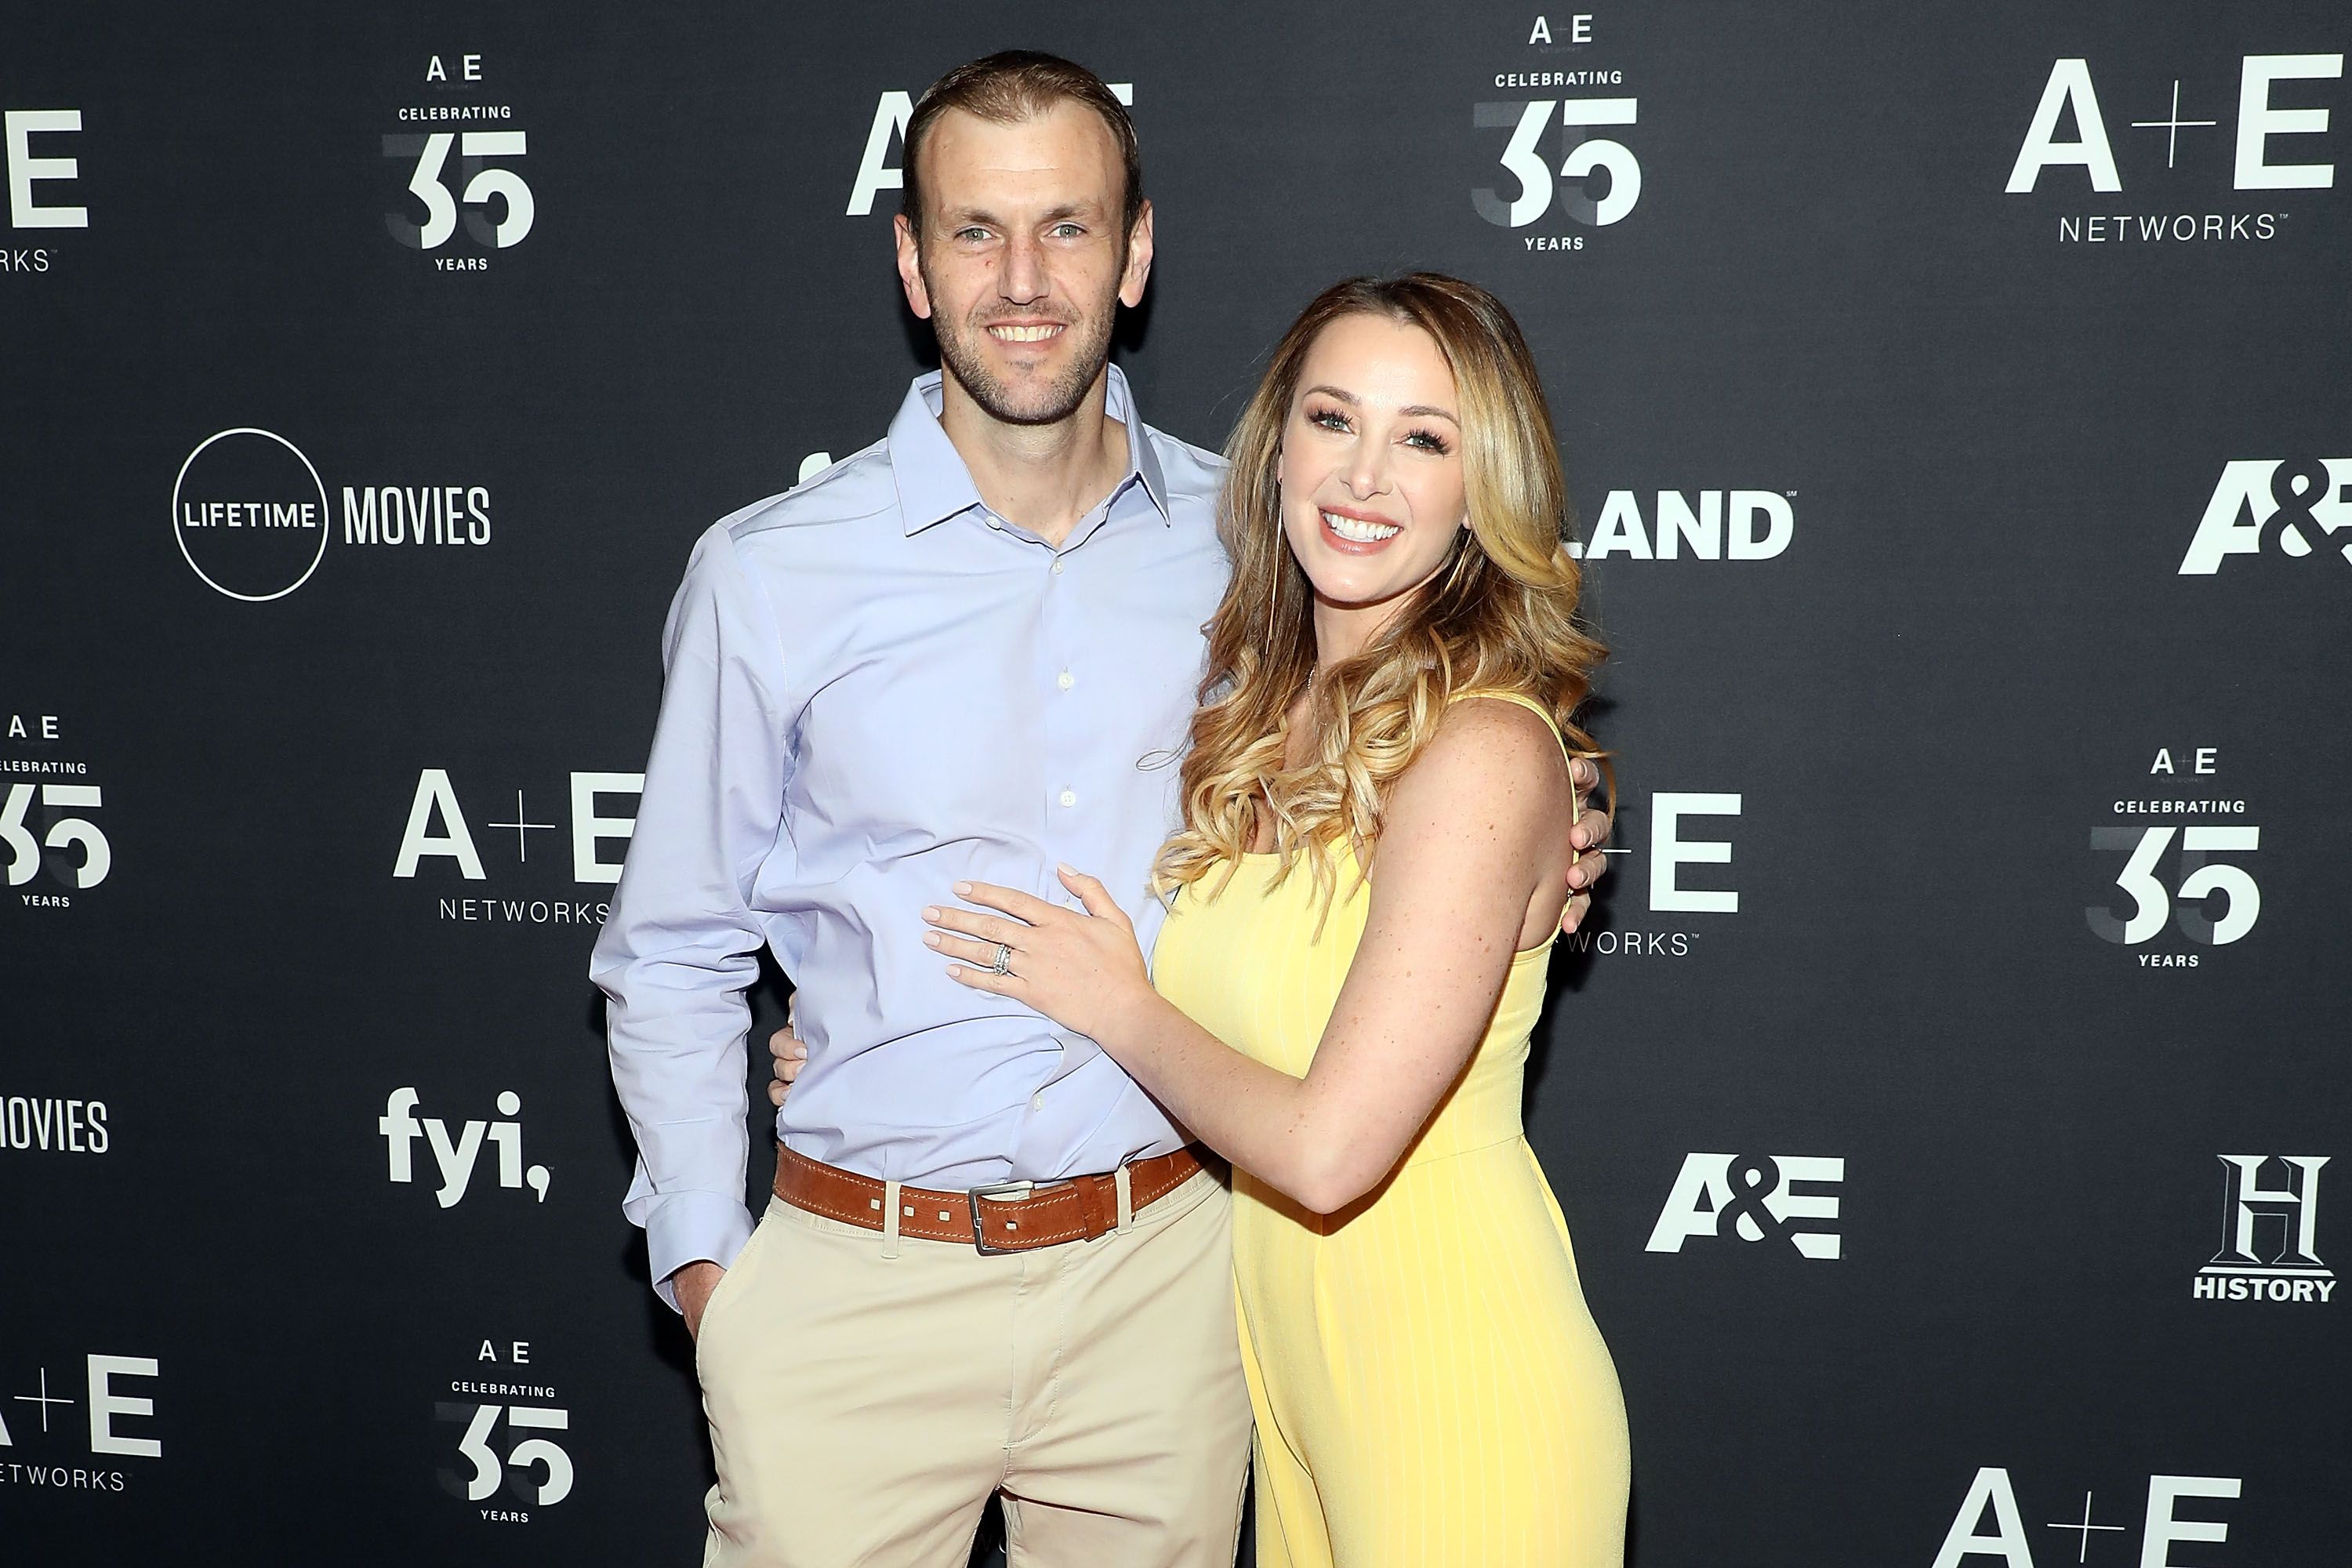 Doug Hehner and Jamie Otis during the 2019 A+E Upfront at Jazz at Lincoln Center on March 27, 2019 in New York City. | Source: Getty Images